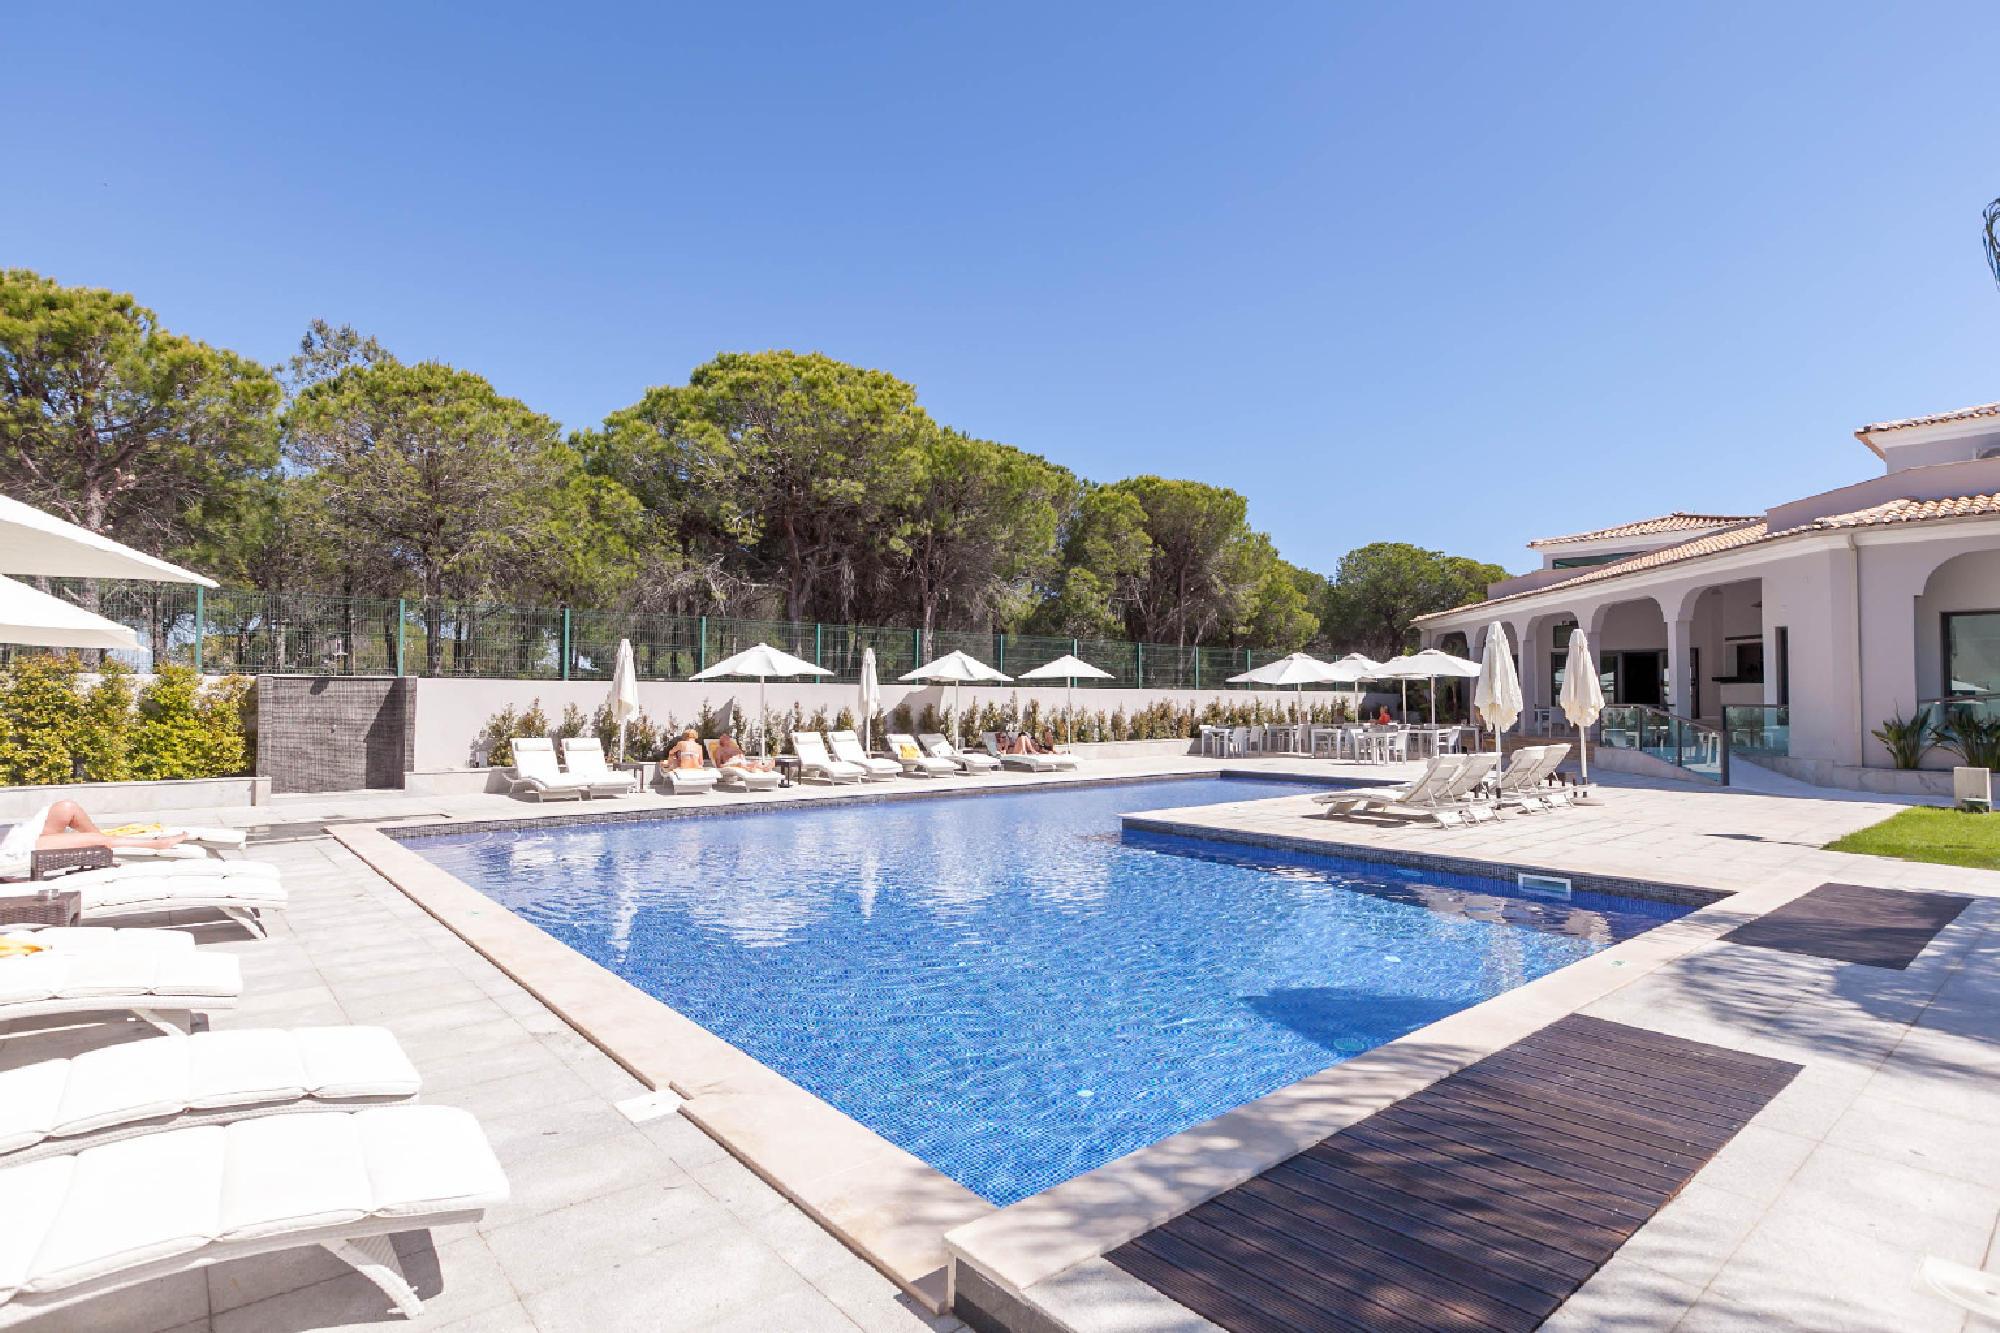 Magnolia Golf and Wellness Hotel's finest outdoor pool within Algarve